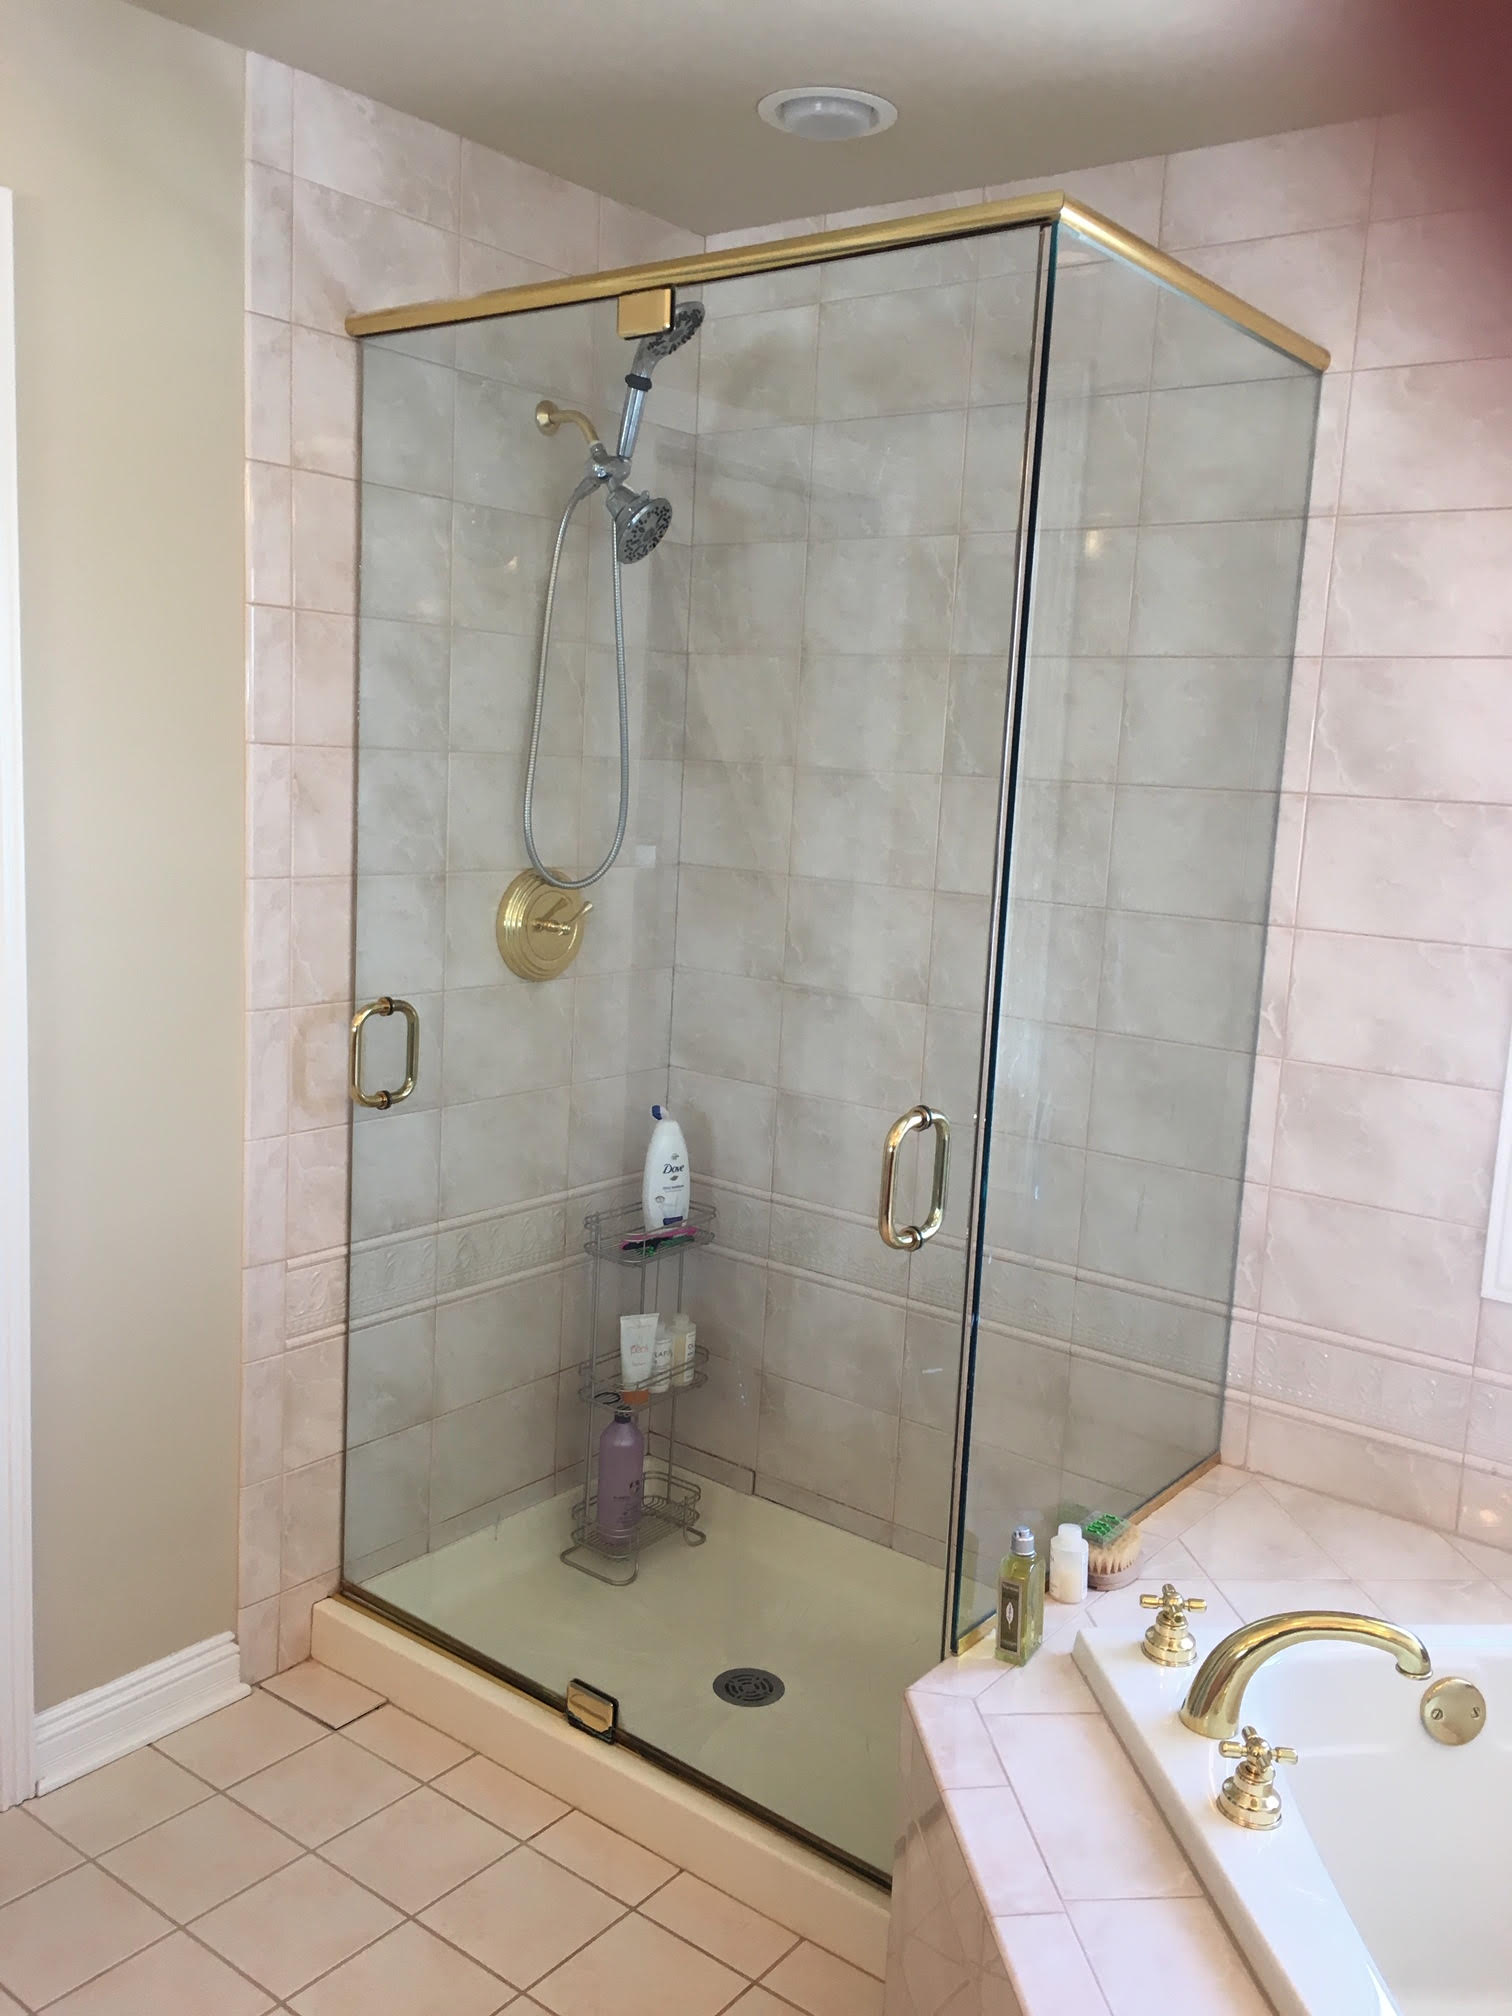 Outdated Shower in St. Charles IL. Bathroom Remodel- BEFORE.jpg